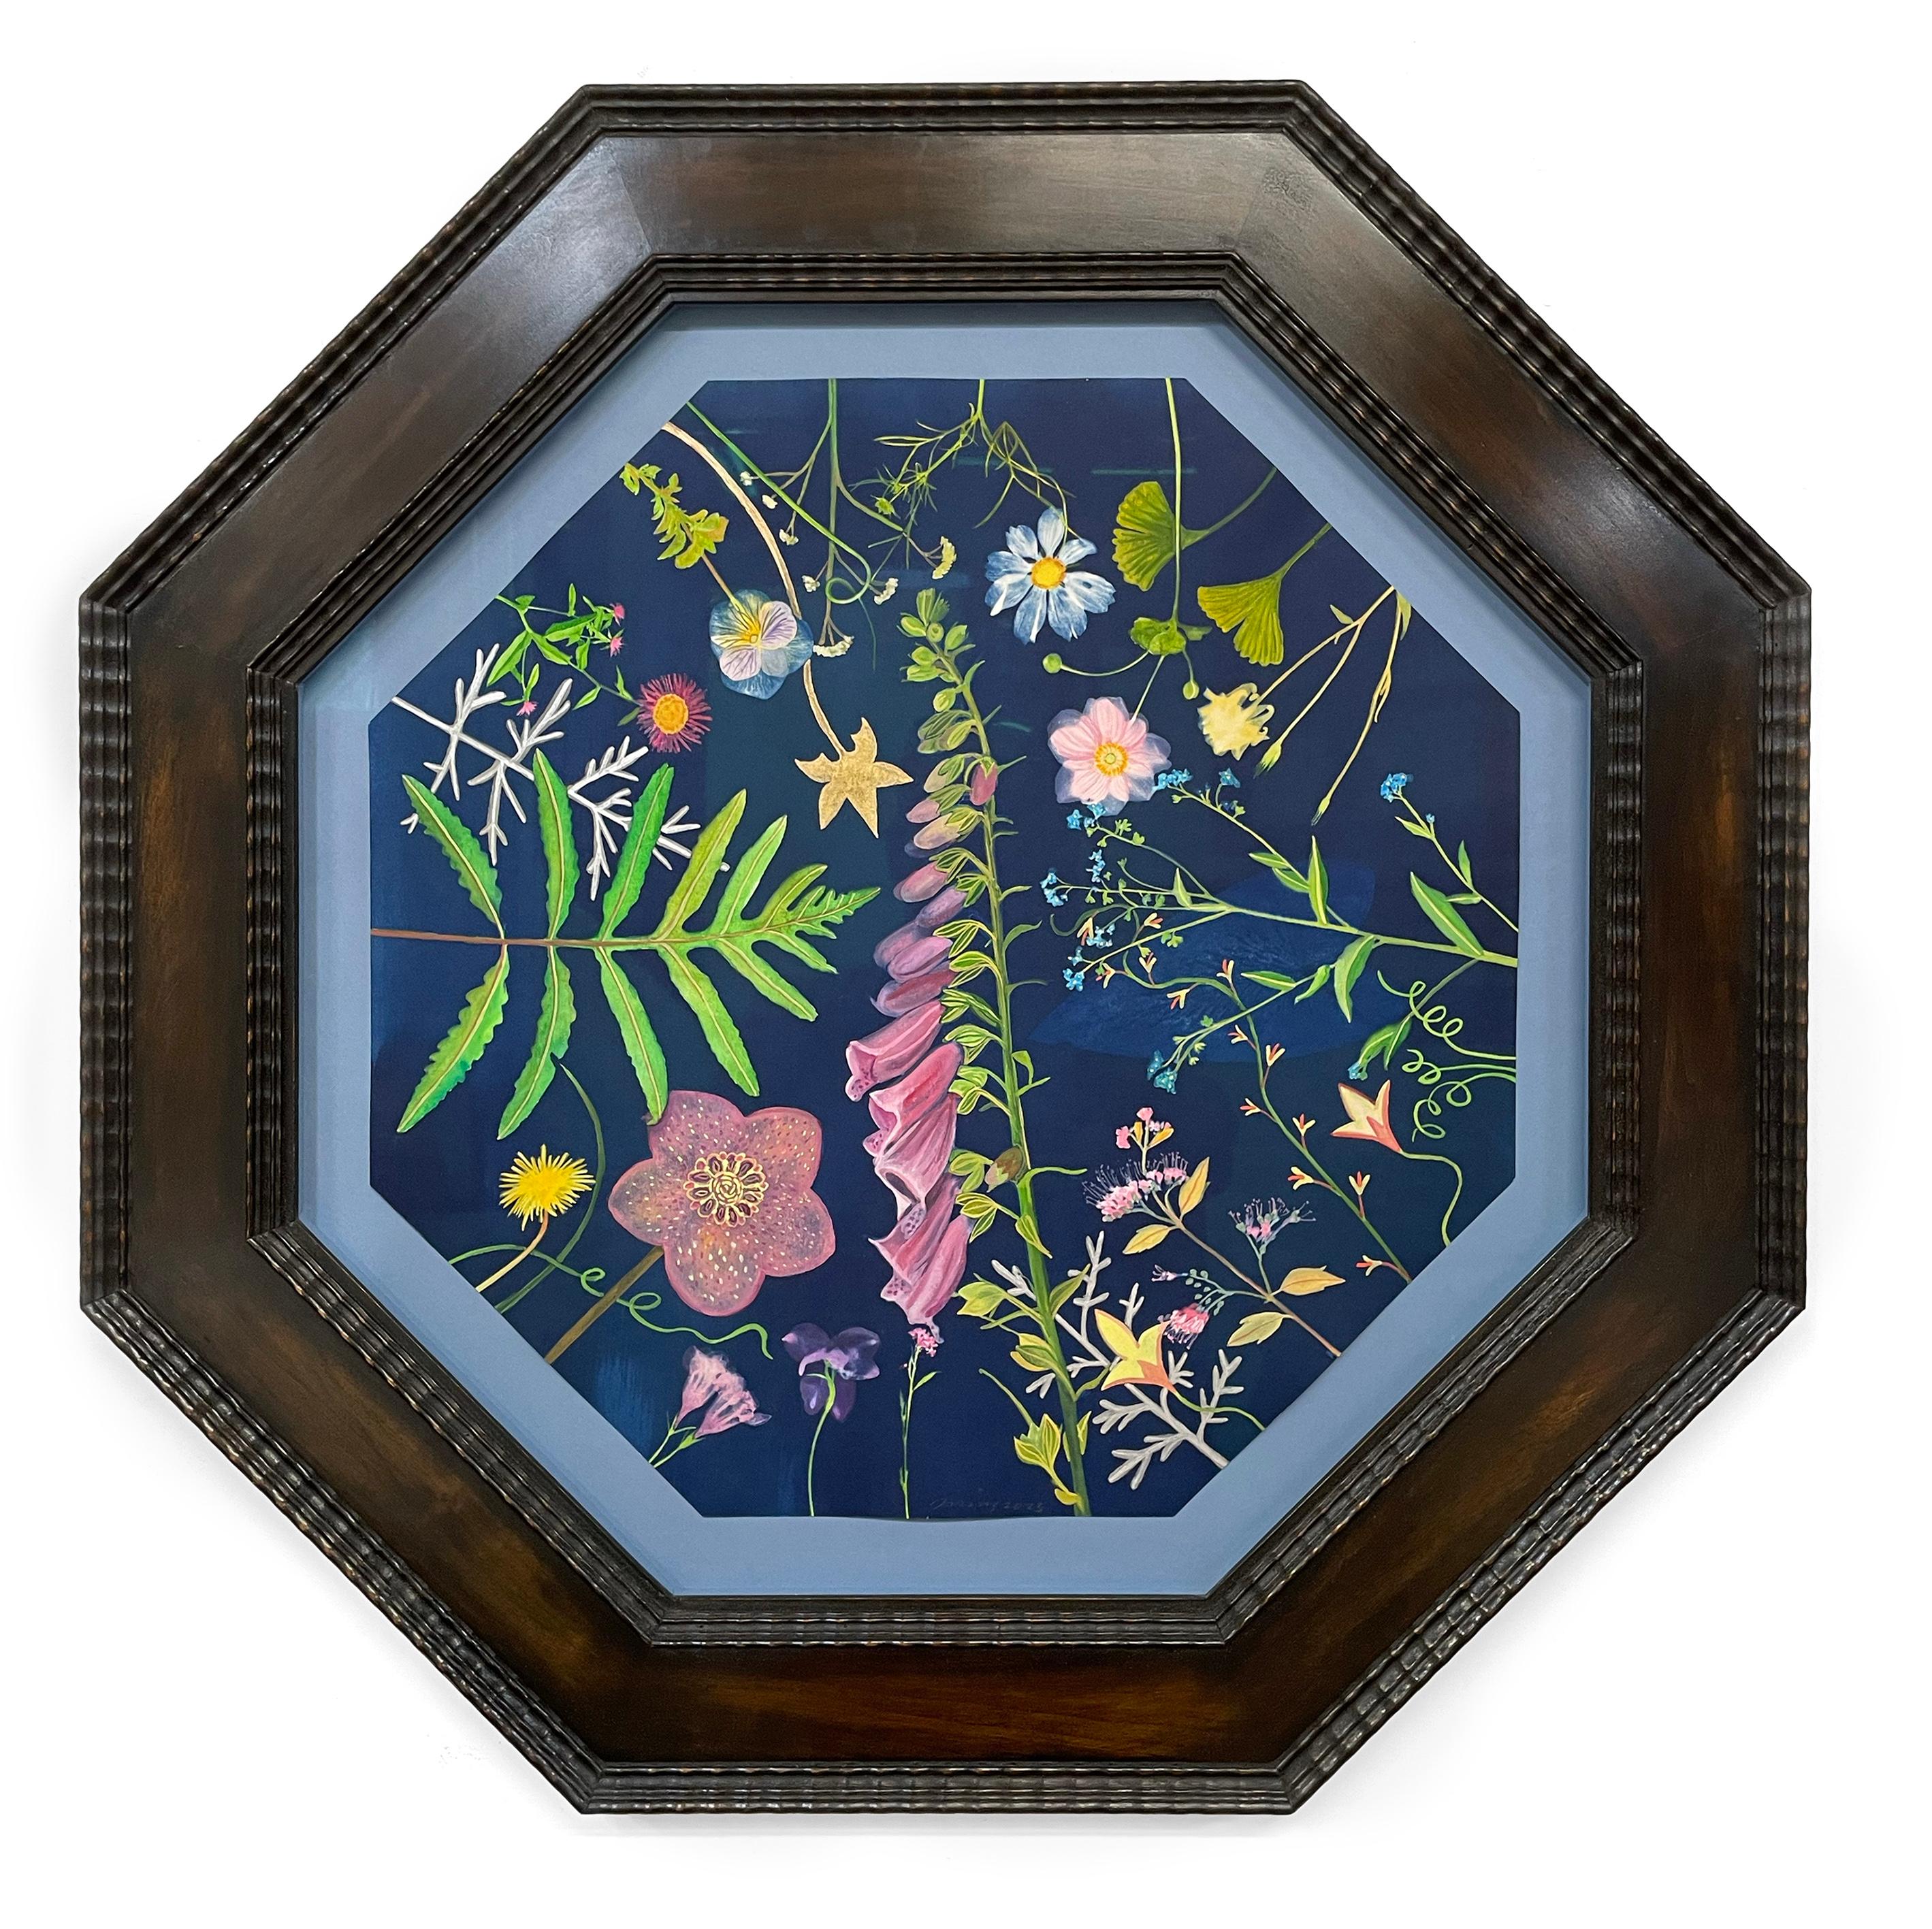 Picturesque Botany (Still Life Painting of Flowers on Blue in Victorian Frame) - Mixed Media Art by Julia Whitney Barnes